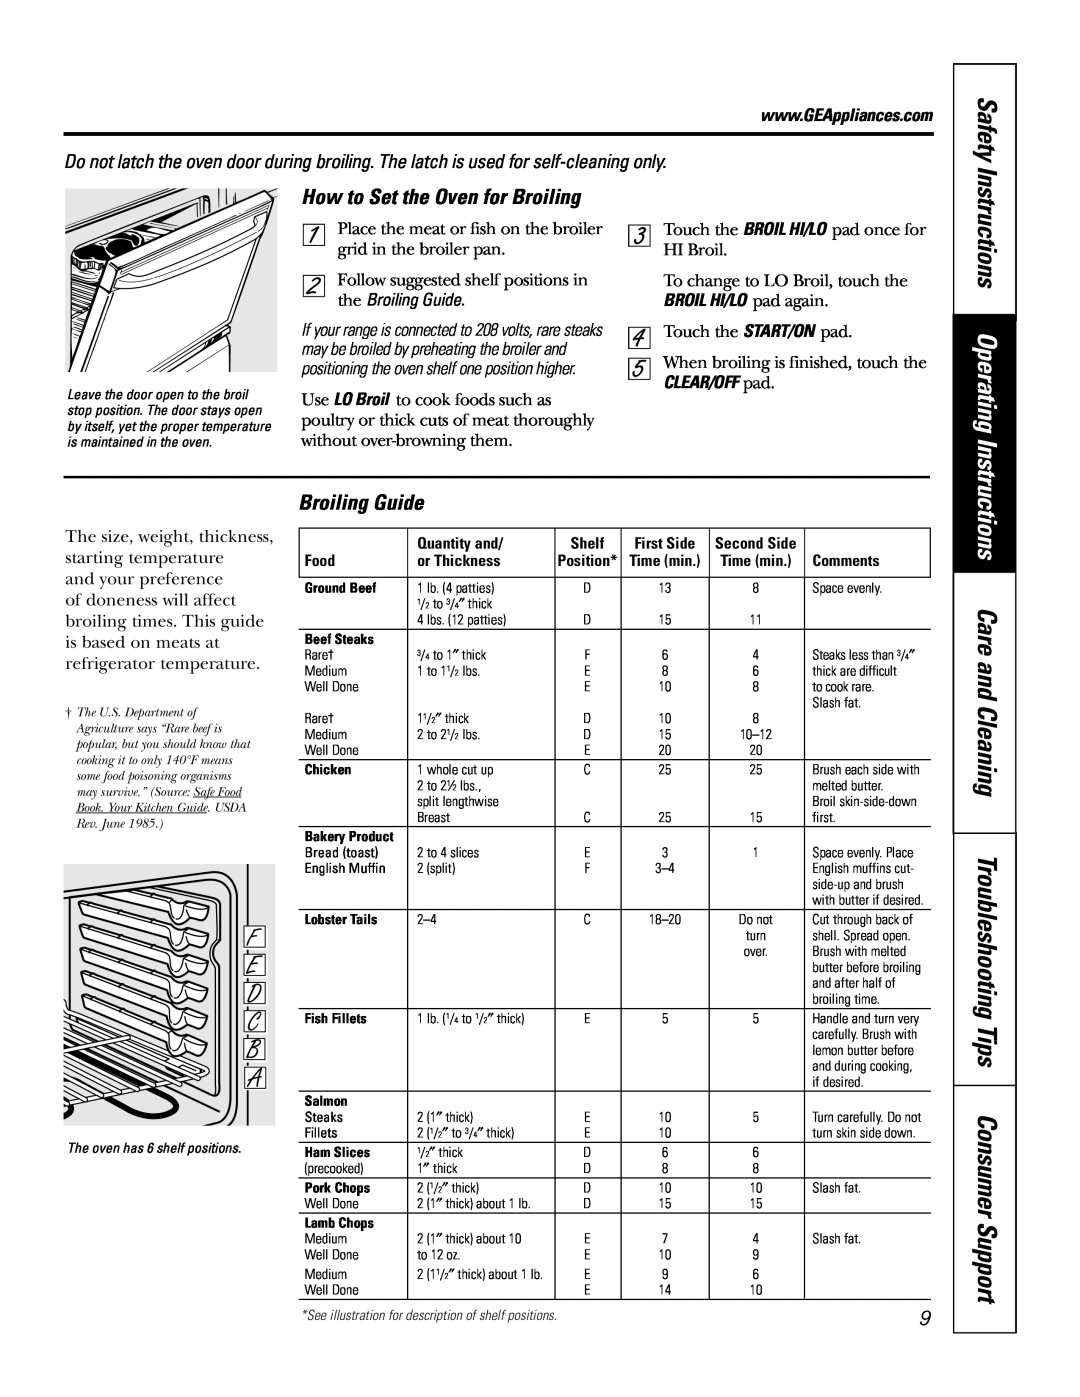 Electrolux JBP26 Instructions Care and Cleaning Troubleshooting Tips Consumer Support, Instructions Operating, Safety 